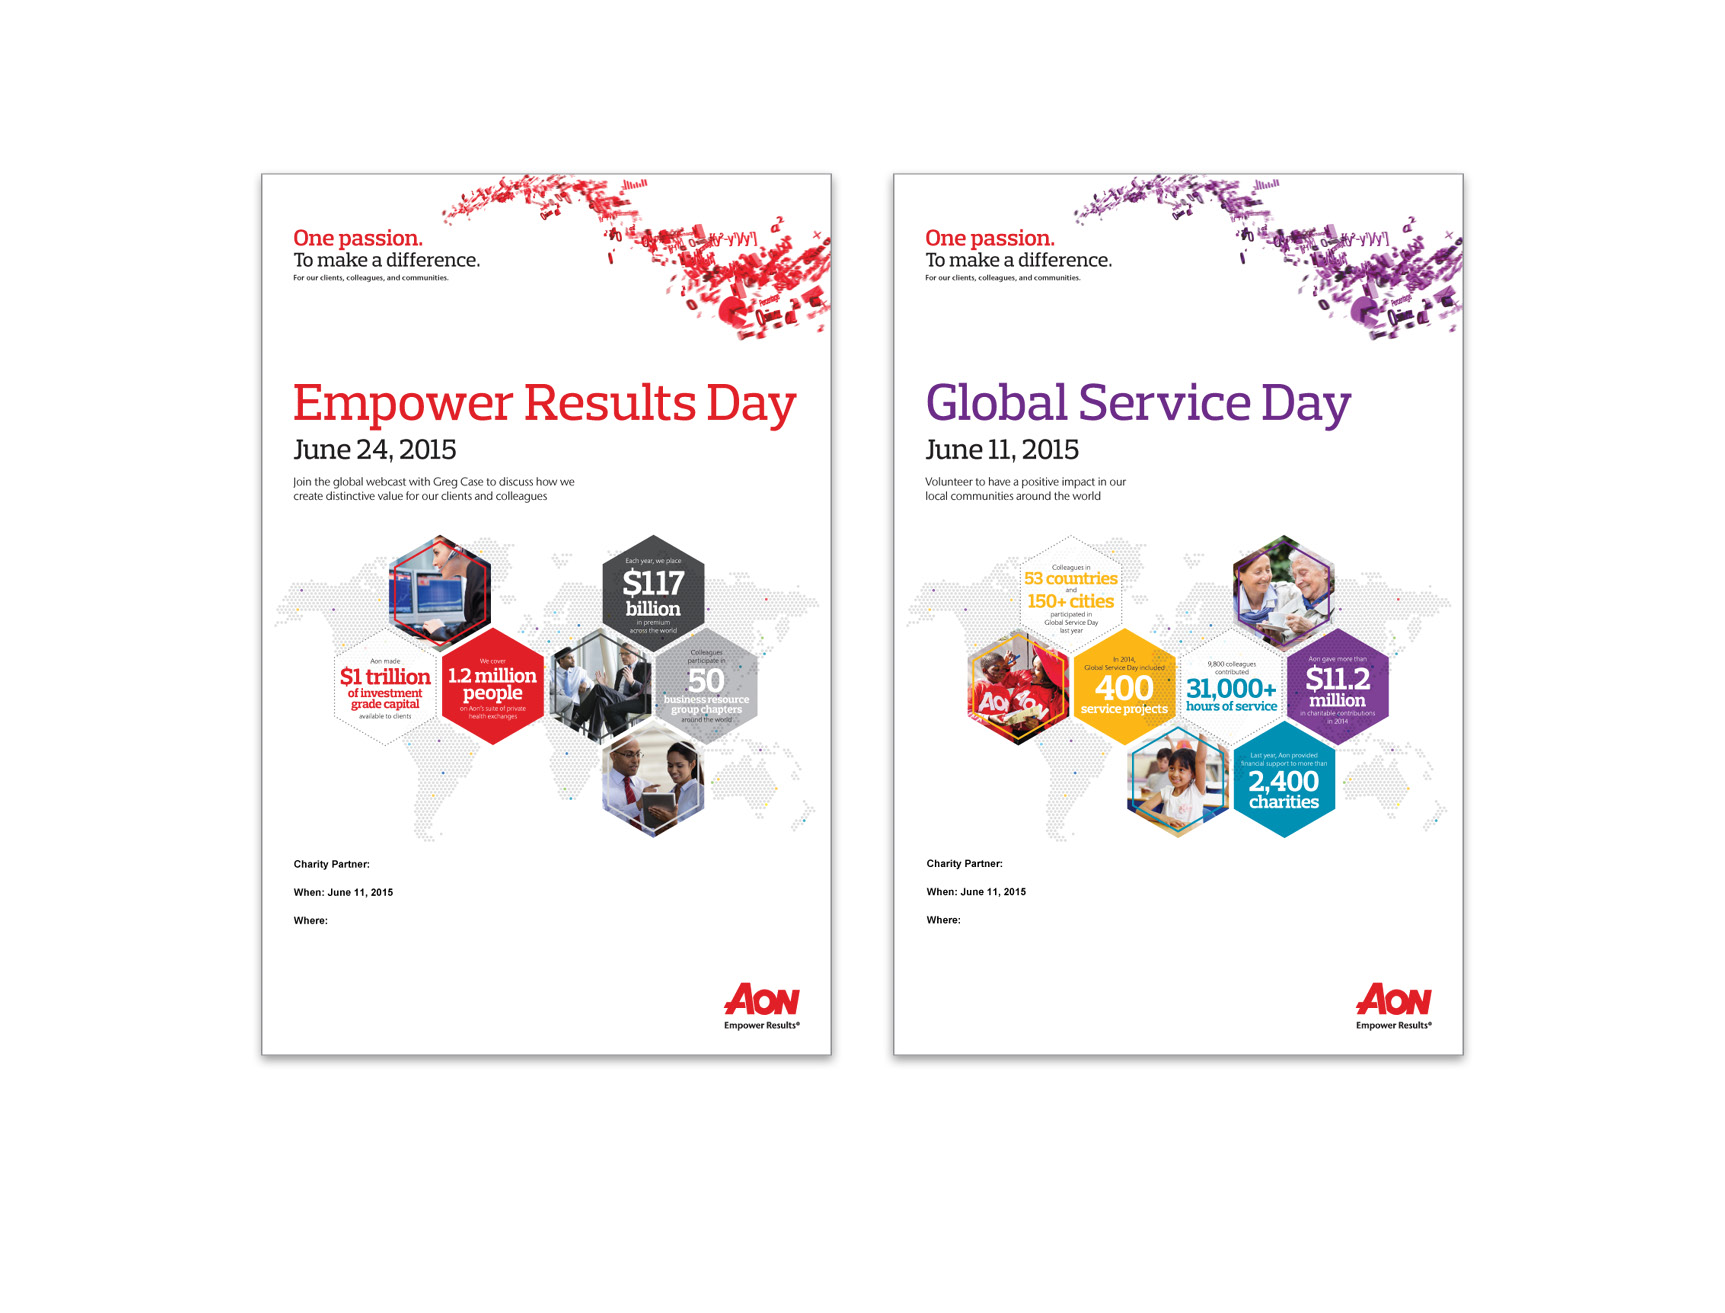  Posters promoting Global Service Day and Empower Results Day. 